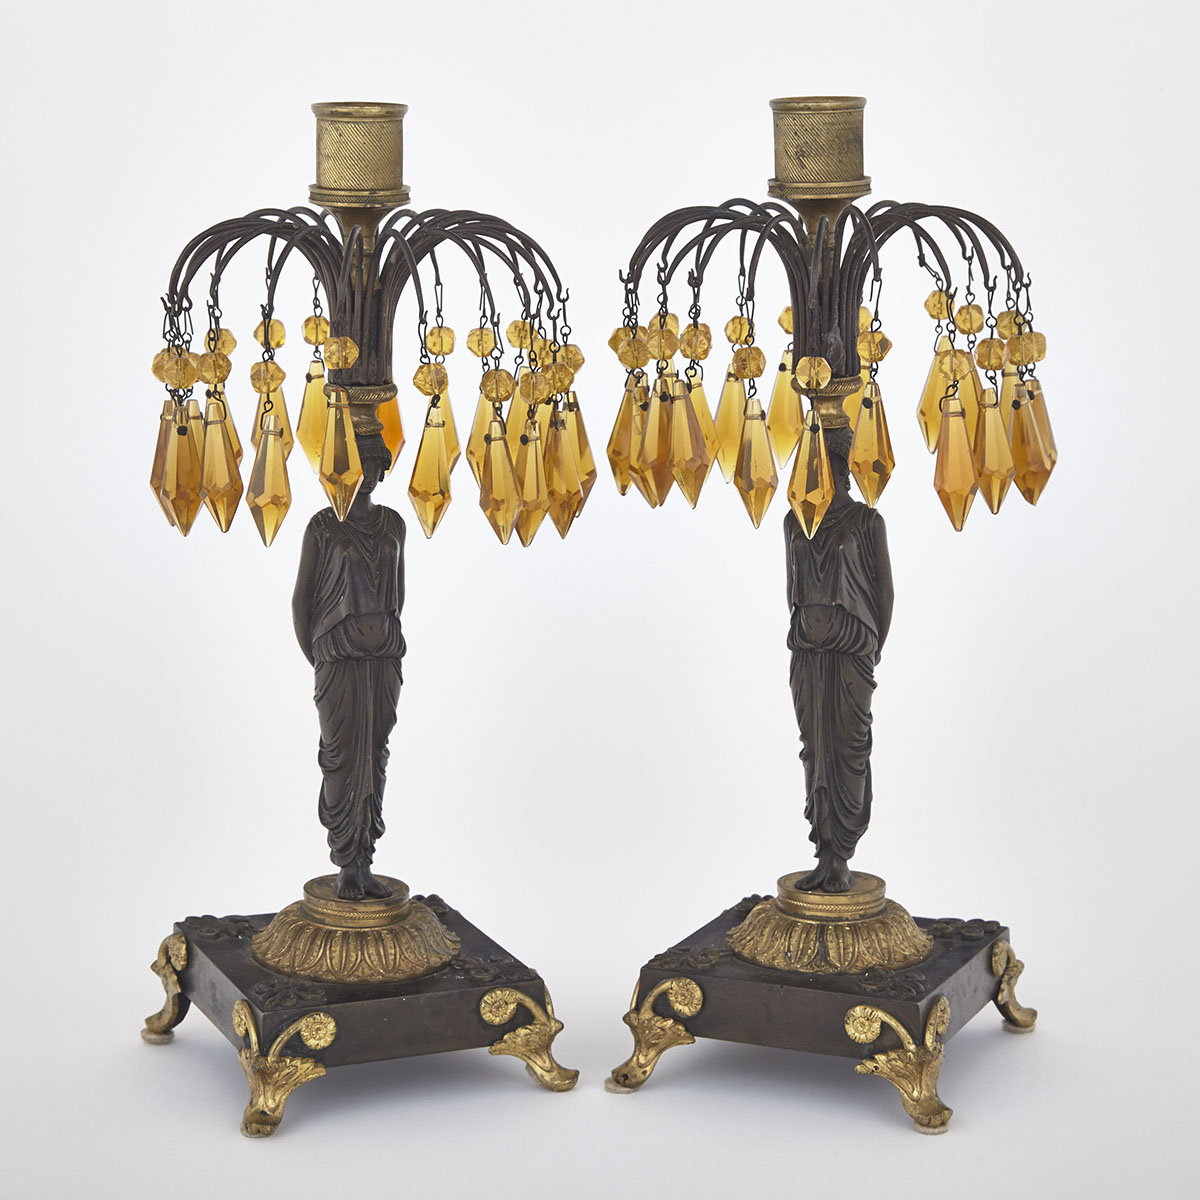 Pair of English Regency Ormolu Mounted Patinated Bronze and Amber Glass Lustre Candlesticks, c.1830